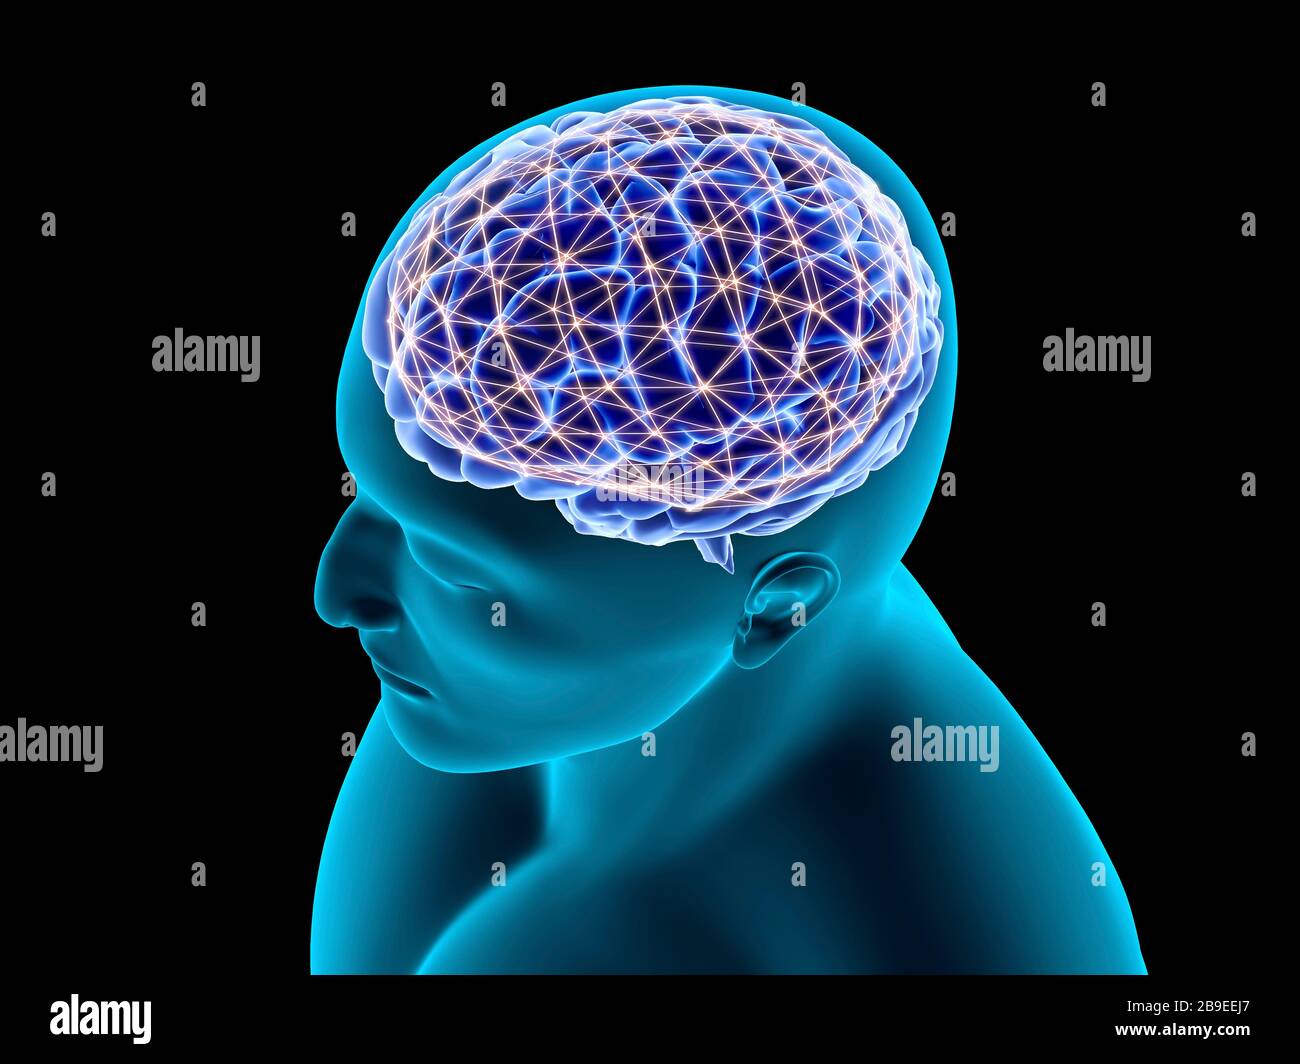 Conceptual image of a neural network in the human brain. Stock Photo